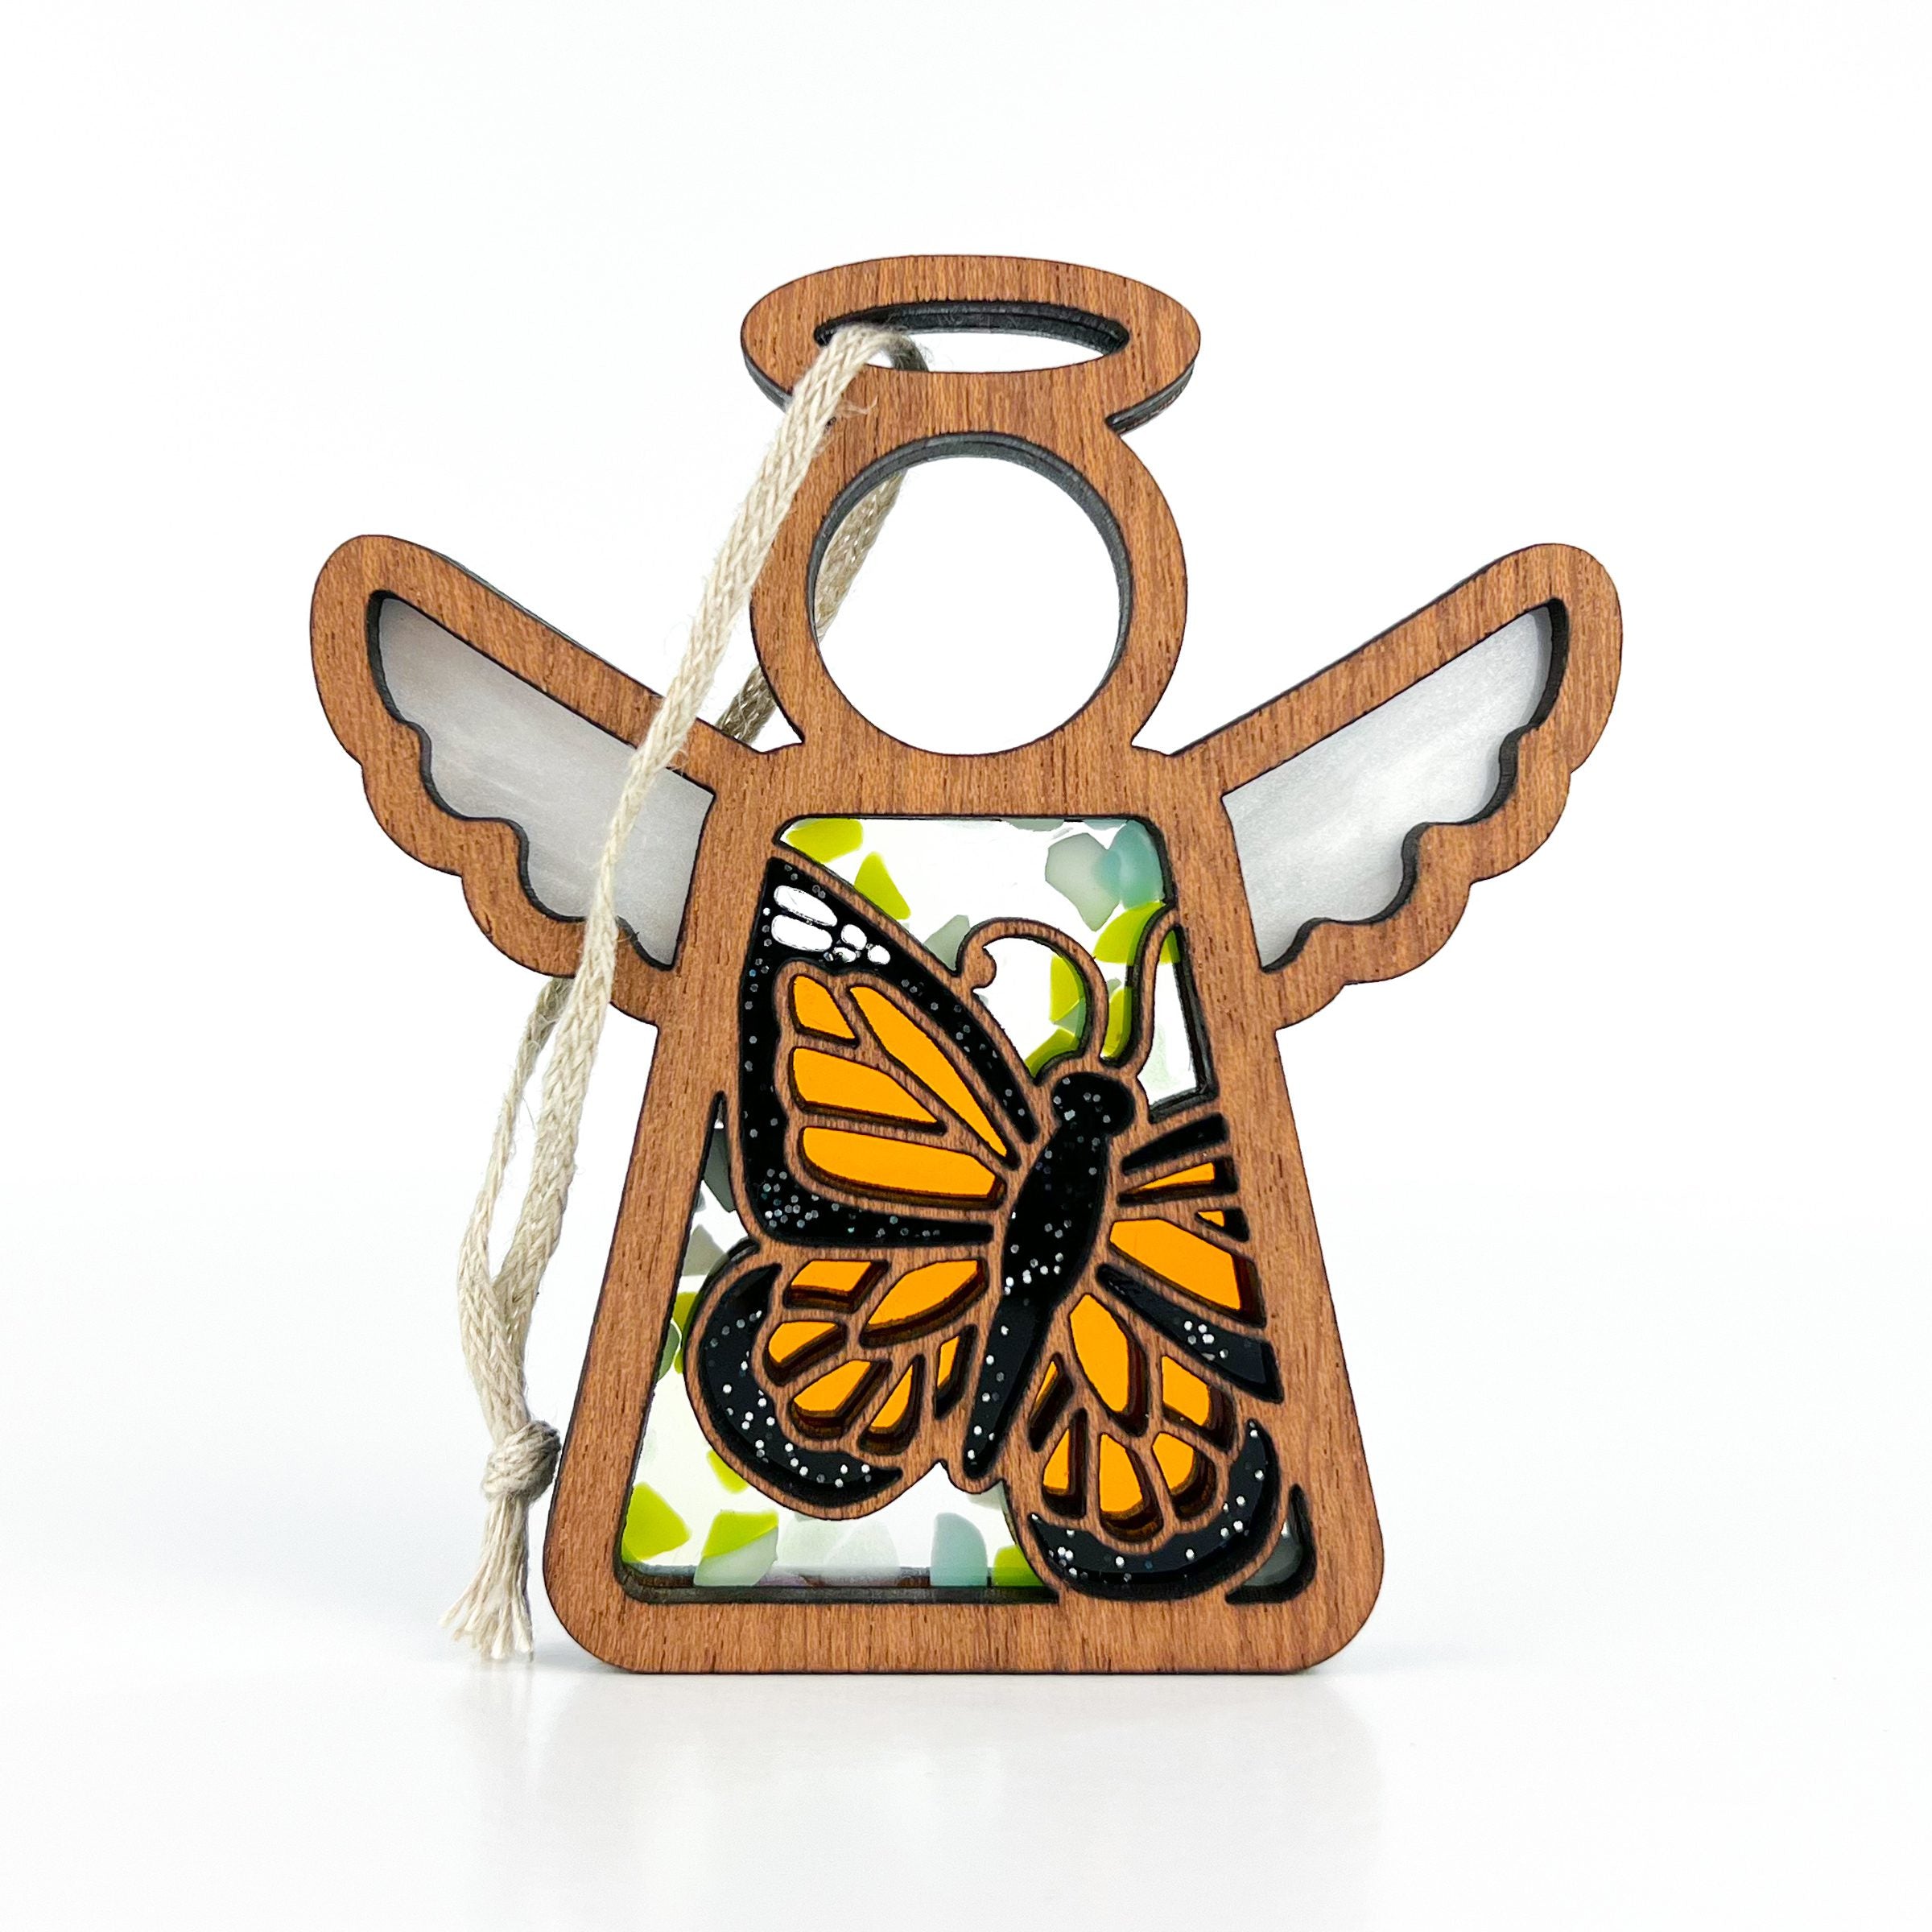 This Mother’s Angels® Monarch Butterfly Ornament embodies the awe-inspiring journey of the monarch butterfly migration. The handcrafted ornament features a vivid orange and black monarch butterfly design, reminiscent of stained glass, set within a wooden angel-shaped frame, complete with delicate white wings and a loop for hanging. The interplay of colors and light brings the magic of the migration into your home.